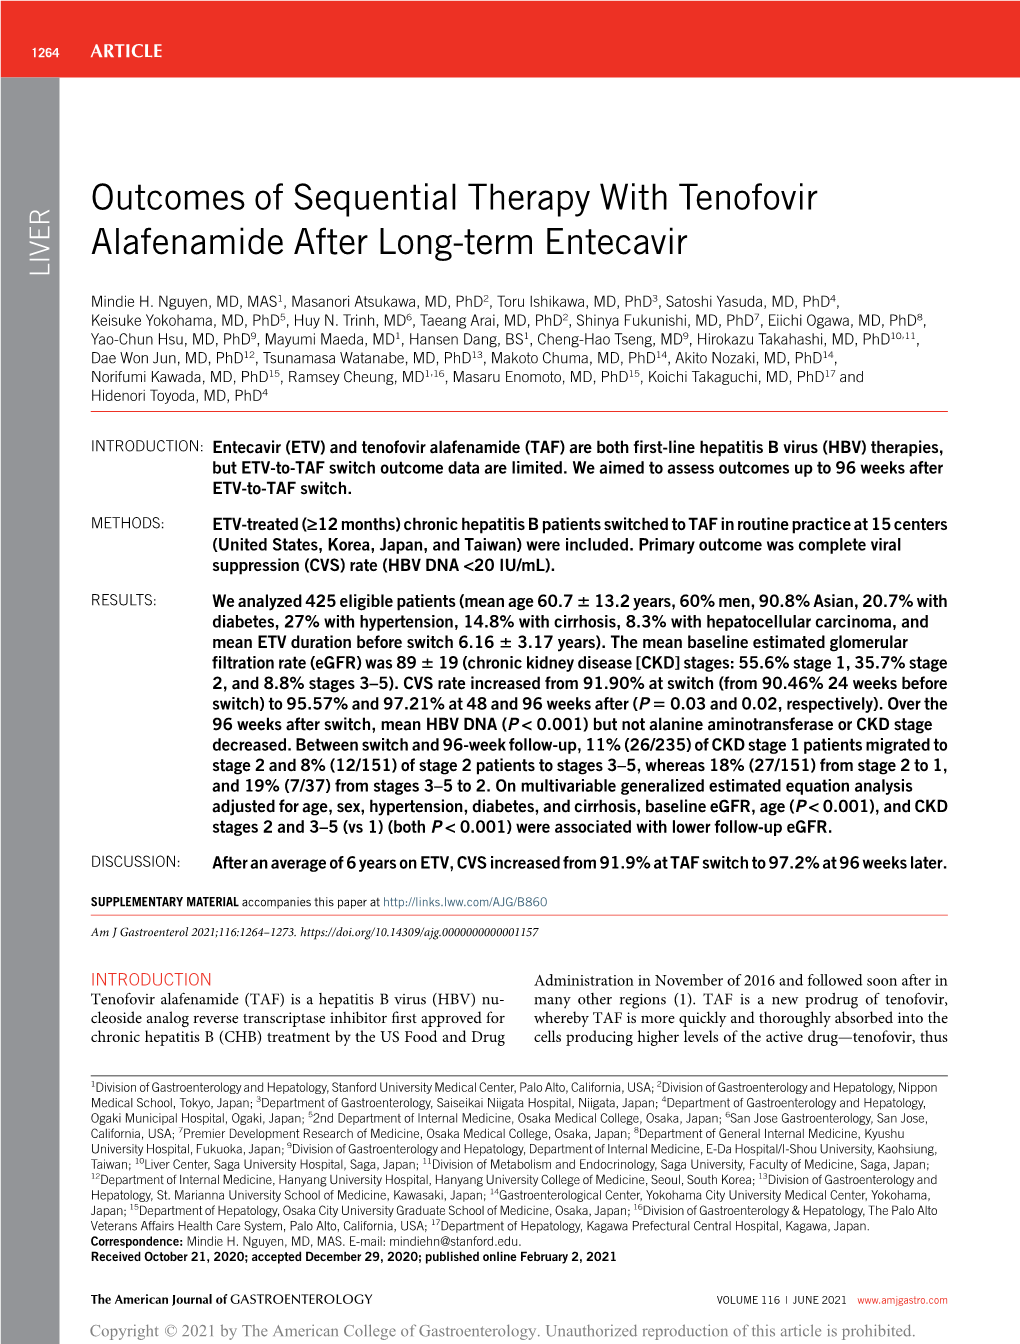 Outcomes of Sequential Therapy with Tenofovir Alafenamide After Long-Term Entecavir LIVER